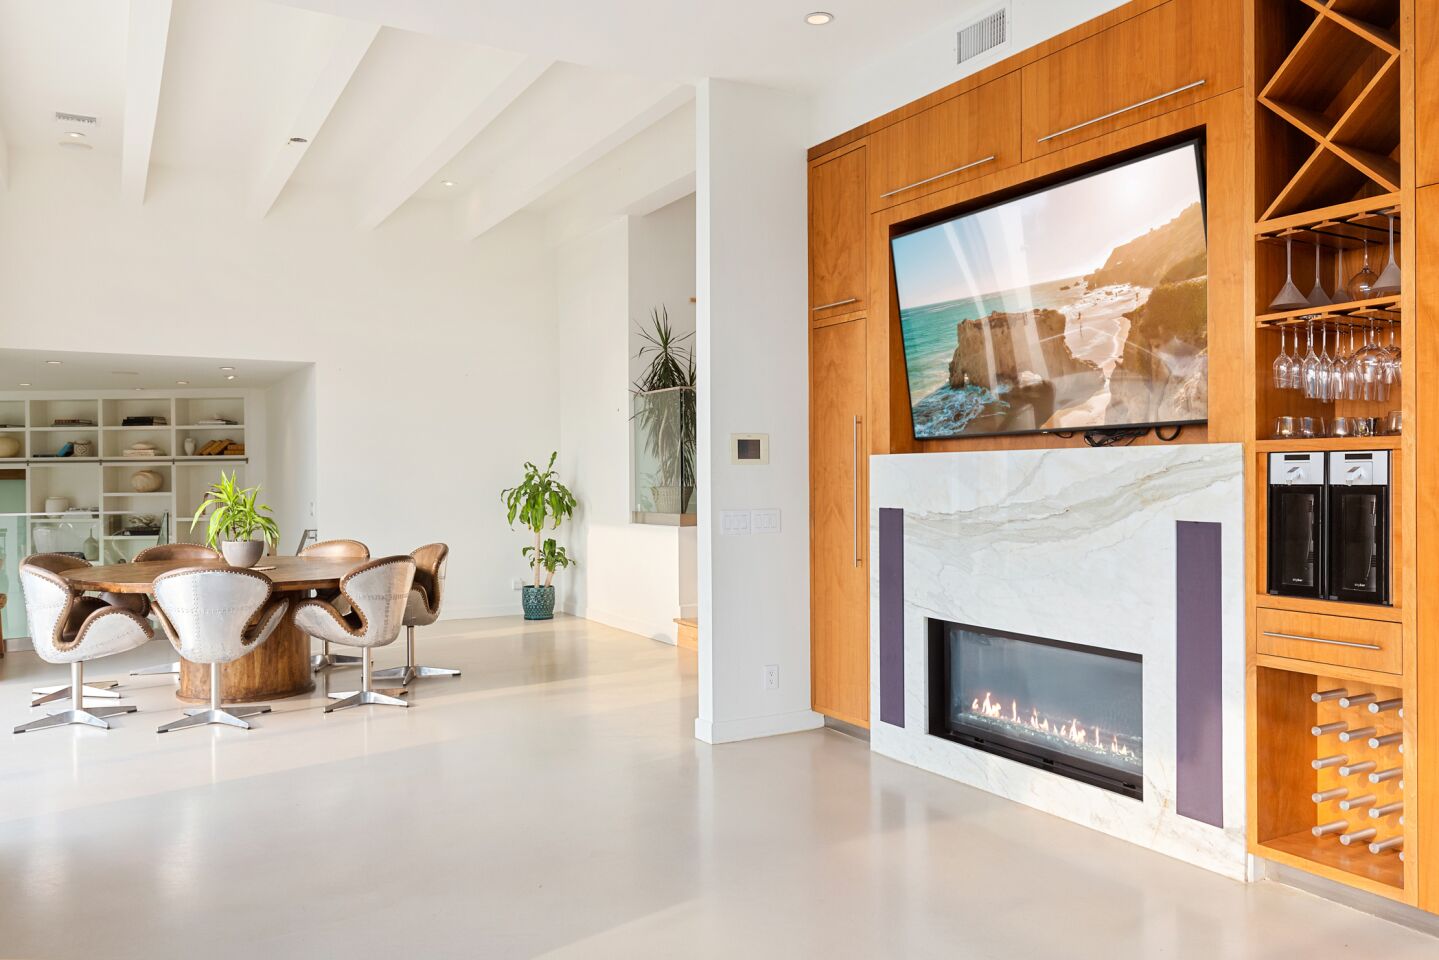 High ceilings, a polished concrete floor and a marble fireplace with built in minibar.